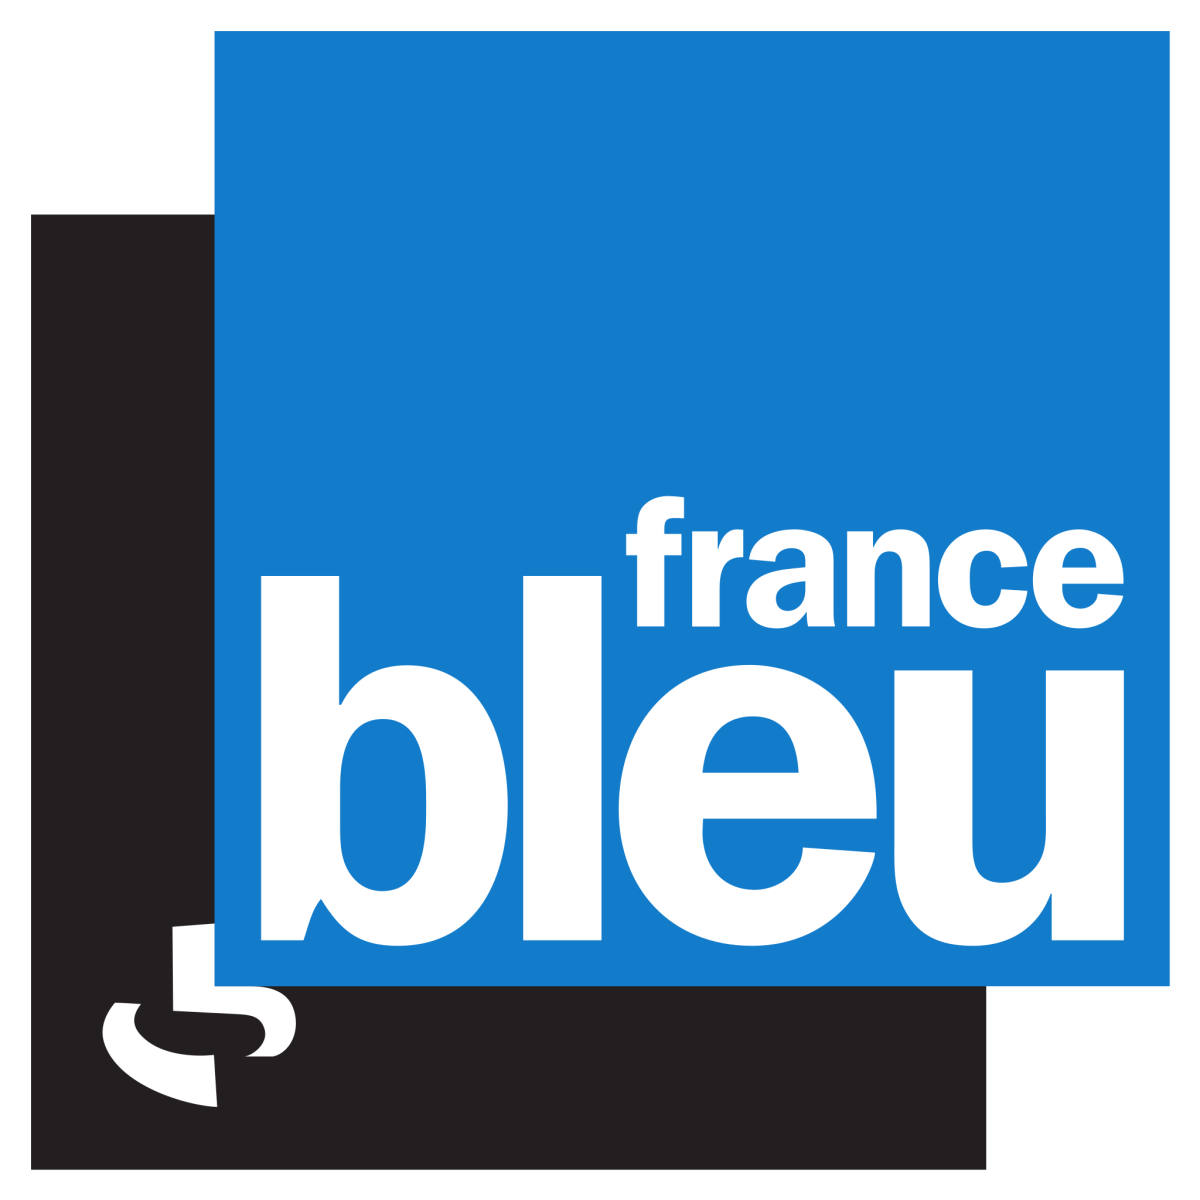 France Bleu talks about the Climate Chance Summit Europe 2022